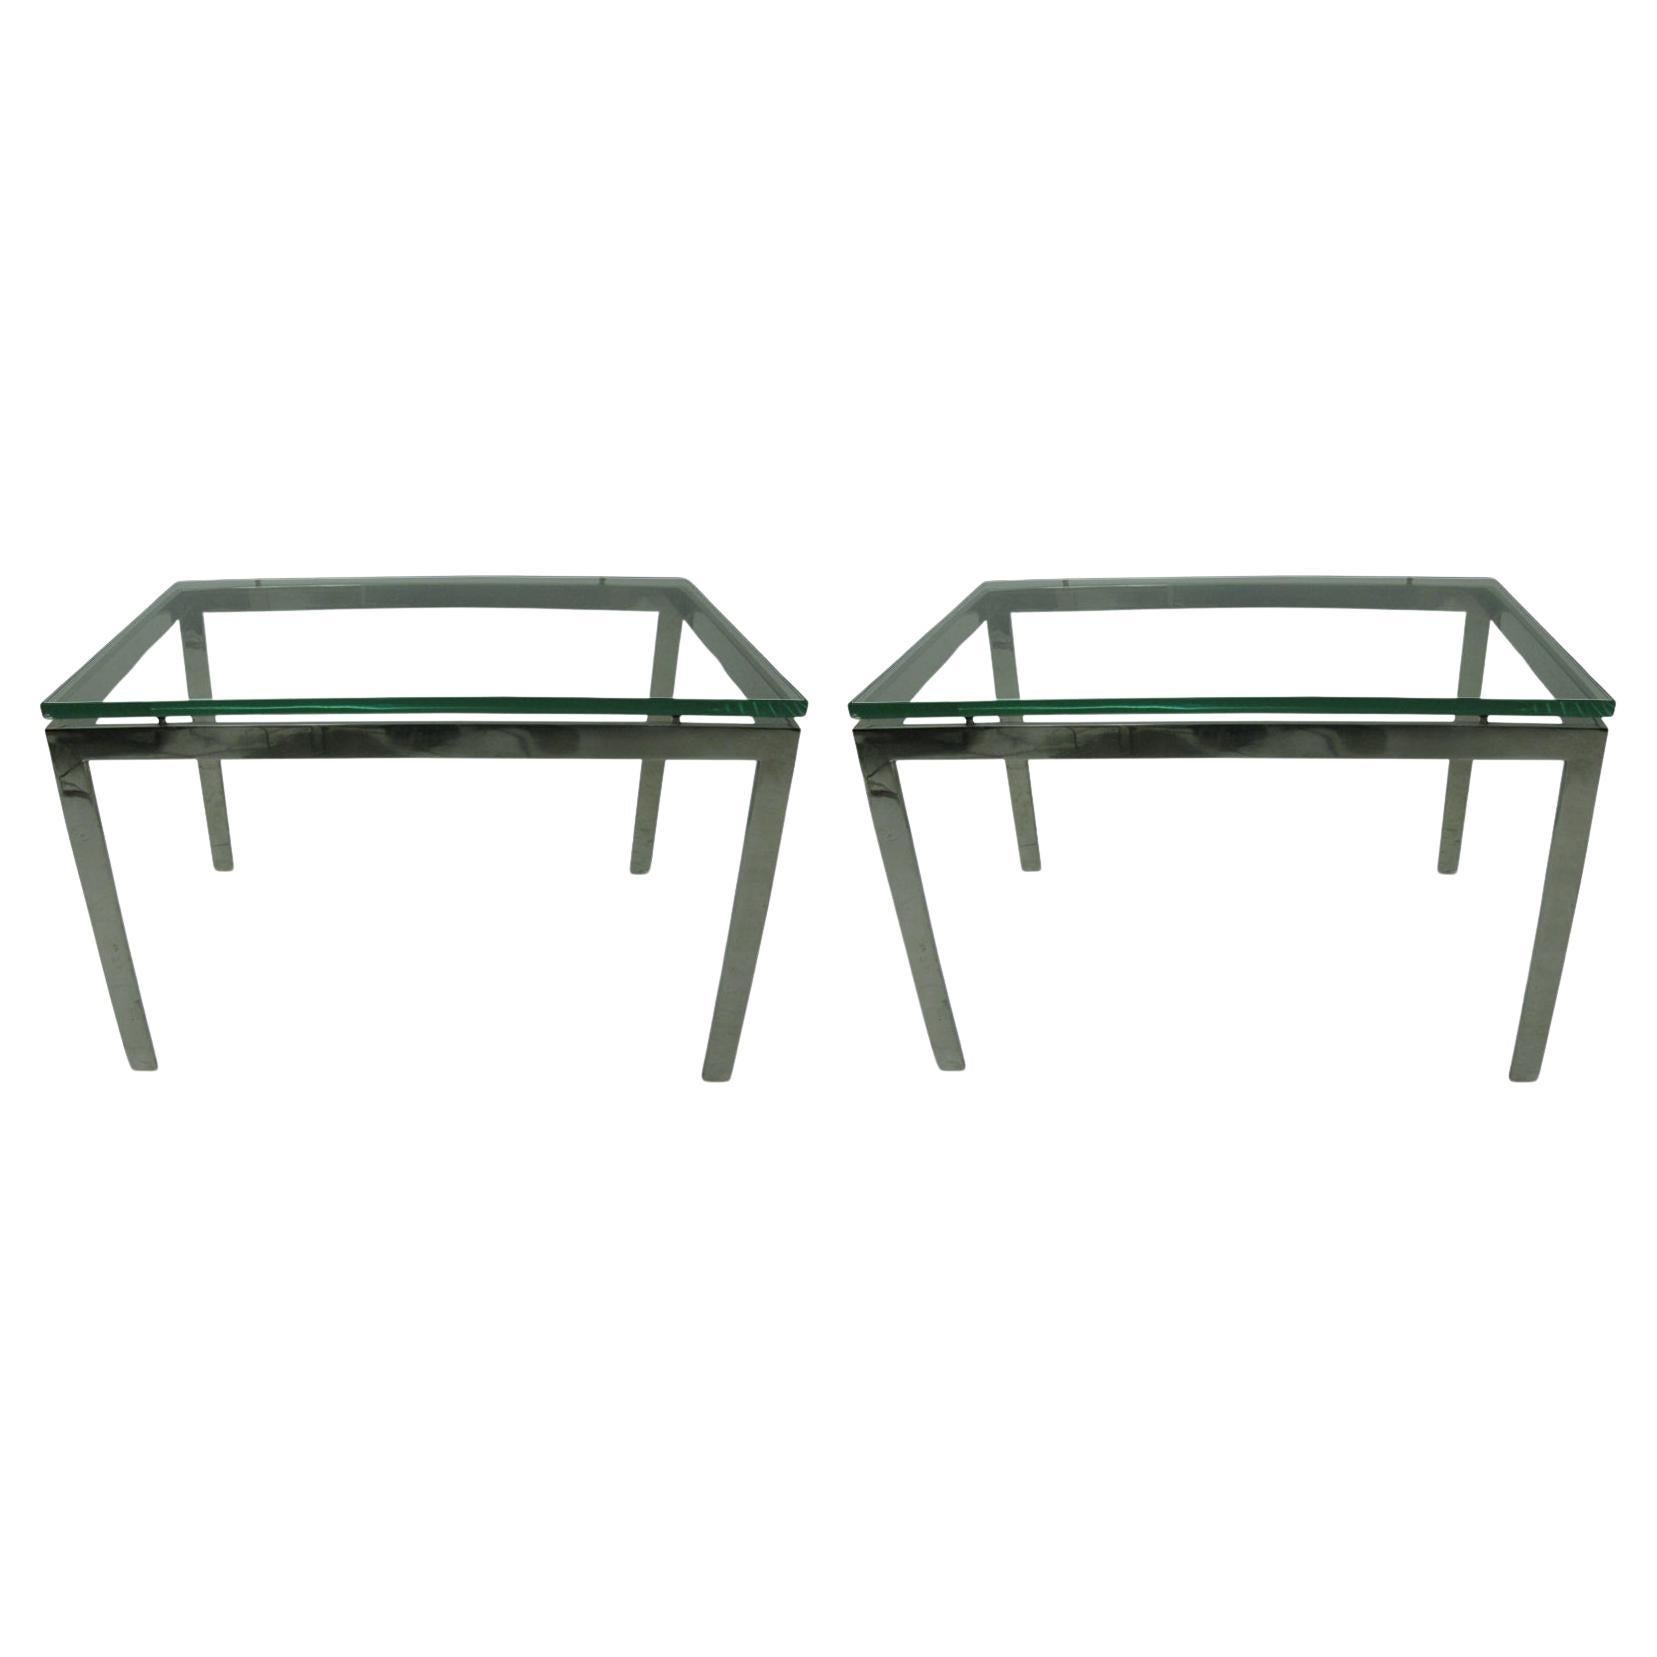 Pair of Mid-Century Modern Nickel Chrome Steel Tables with Dimensional Glass Top For Sale